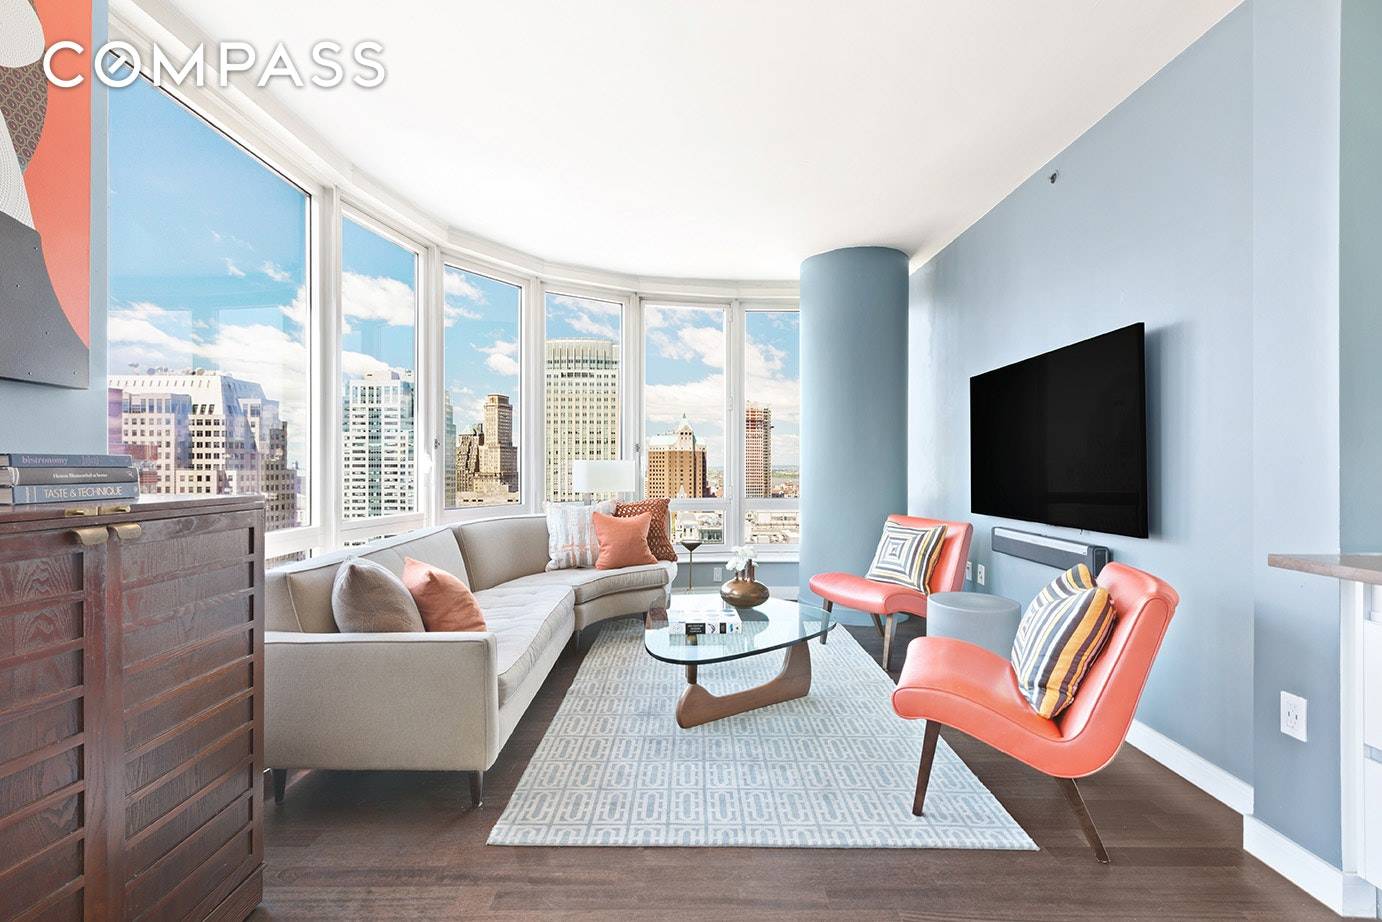 Perched above the Brooklyn and Manhattan skyline, apartment 29D beckons you the moment you open the door.